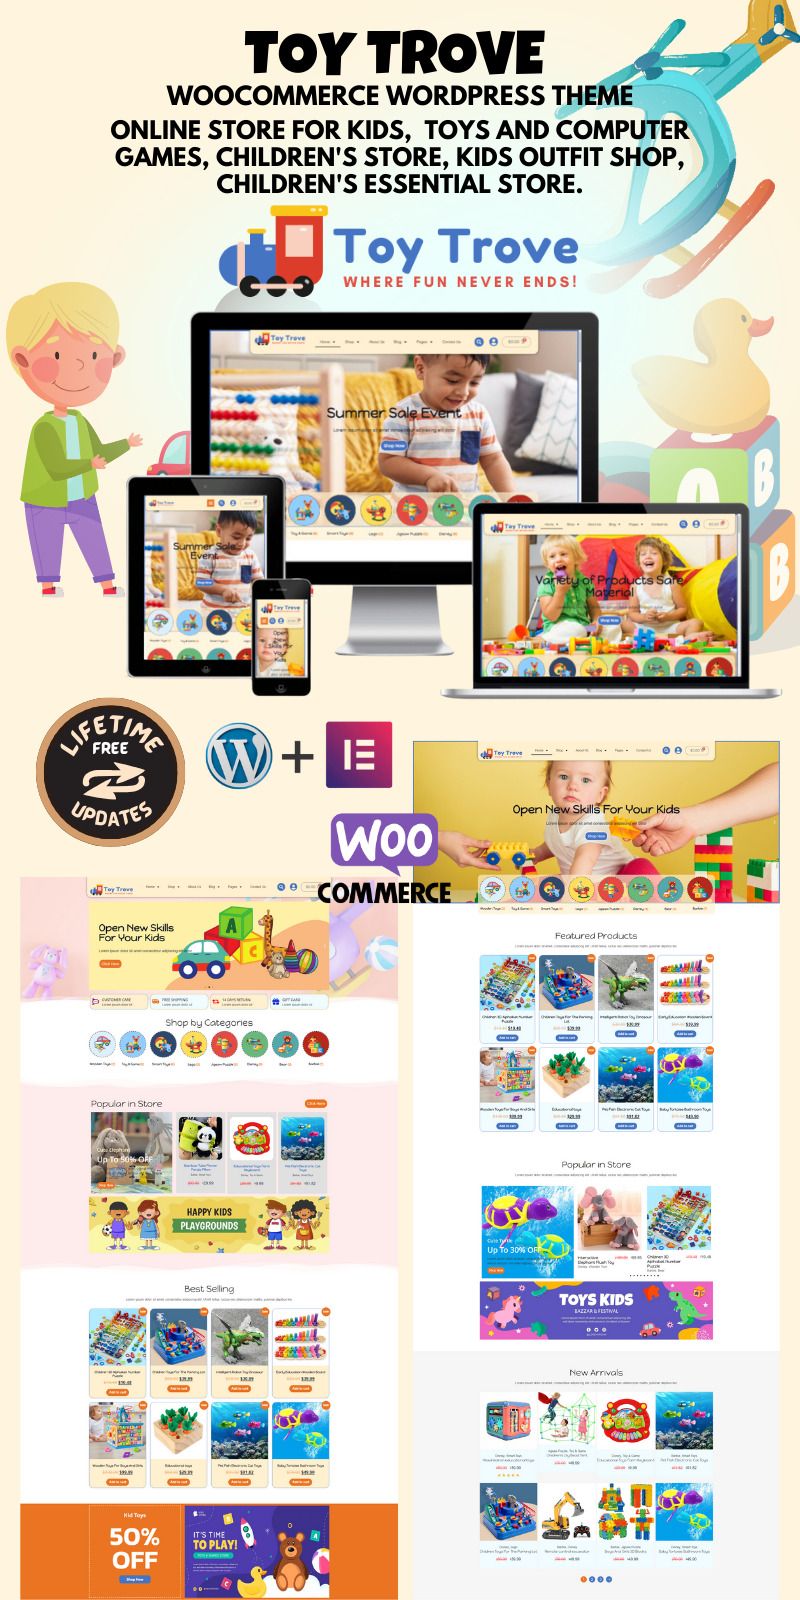 Toy Trove - WooCommerce Elementor WordPress theme for kids' toys, apparel, gift items, and more. - Features Image 1